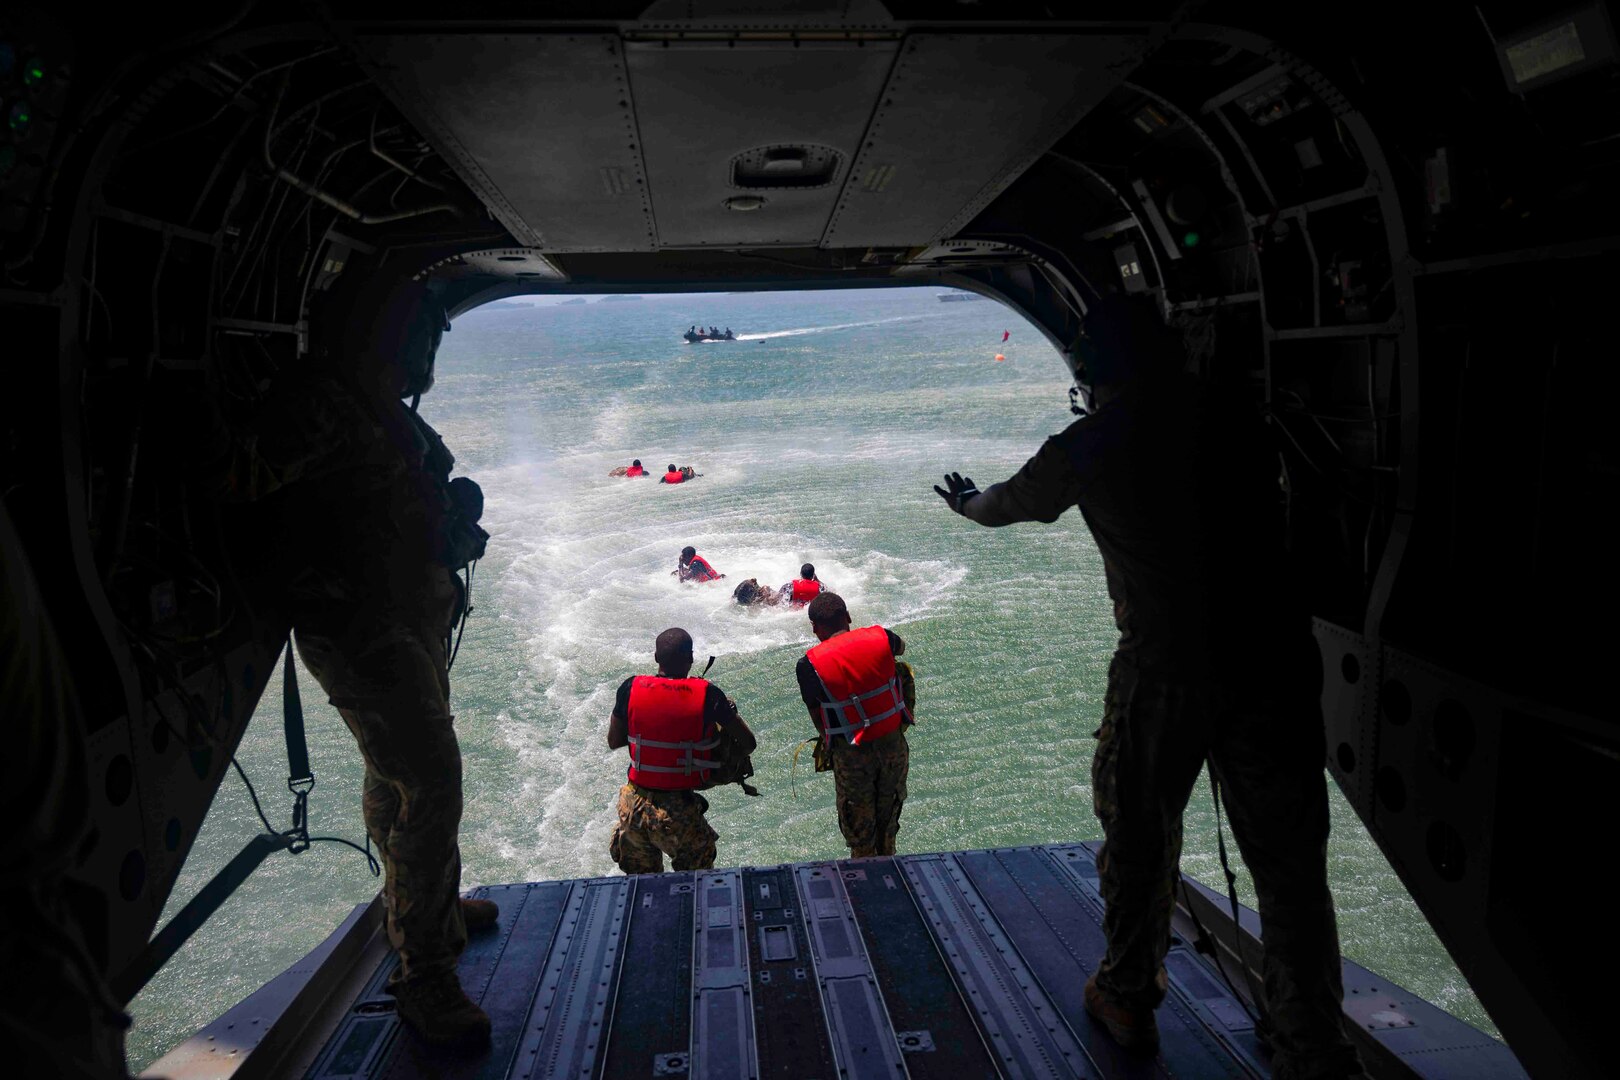 Service members wearing red life vests jump into water from an airborne aircraft.